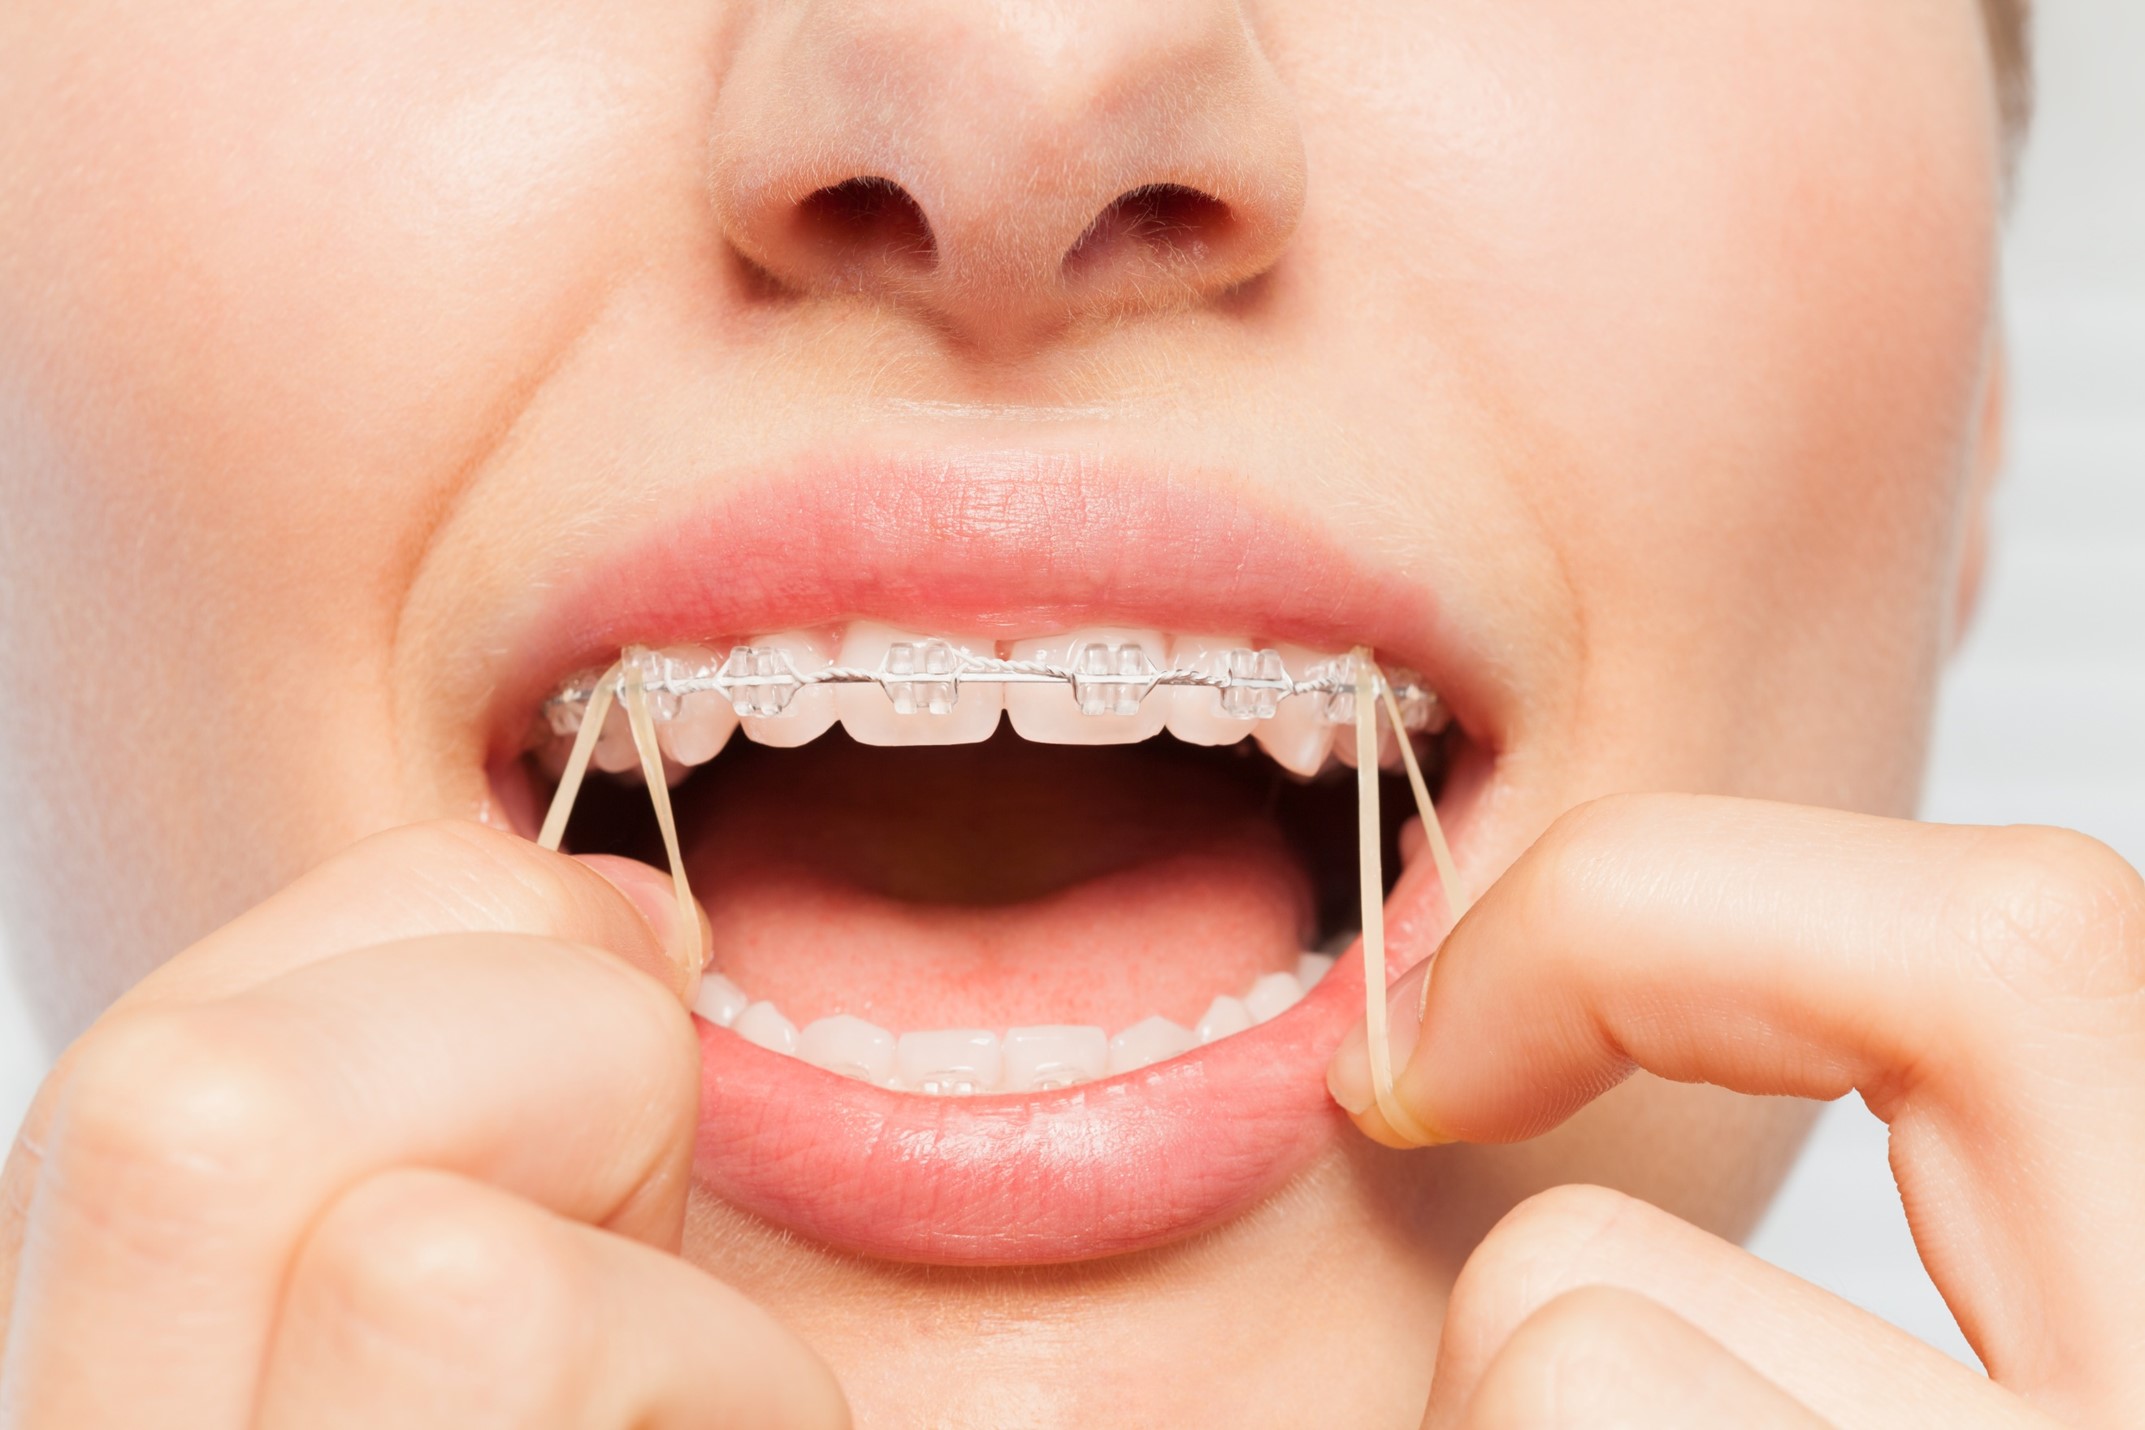 Are braces rubber bands used with Invisalign too?